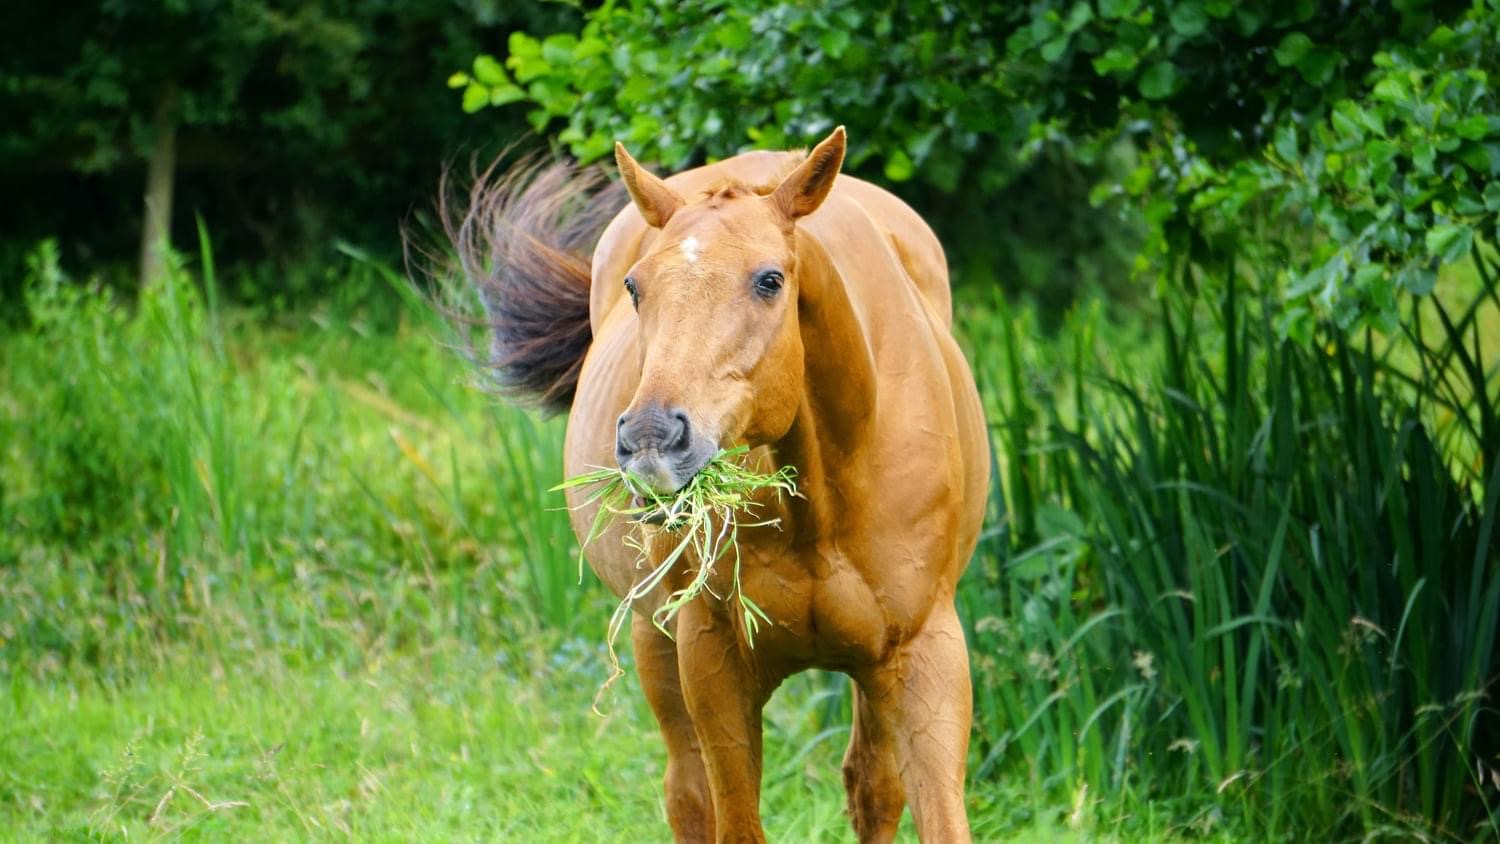 NEWS | Horse dies as a result of eating grass cuttings